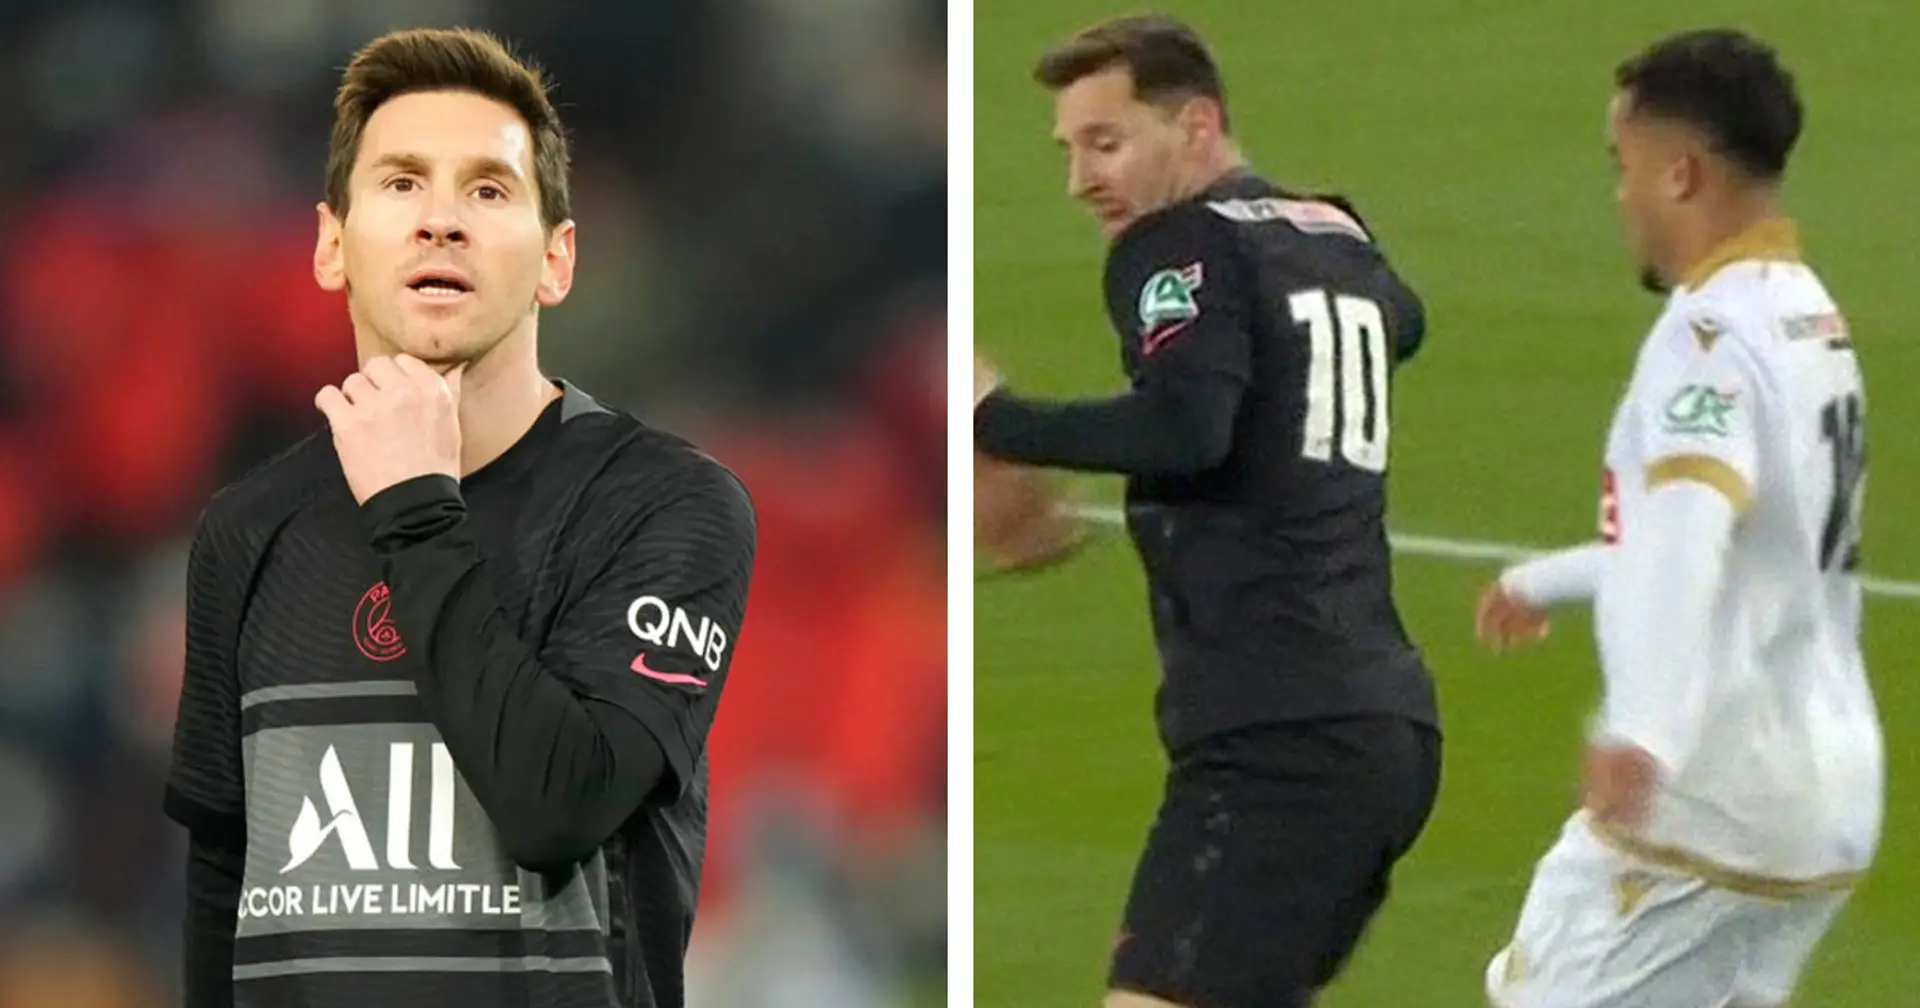 Why Leo Messi wore Neymar's no.10 jersey during PSG's game against Nice – explained